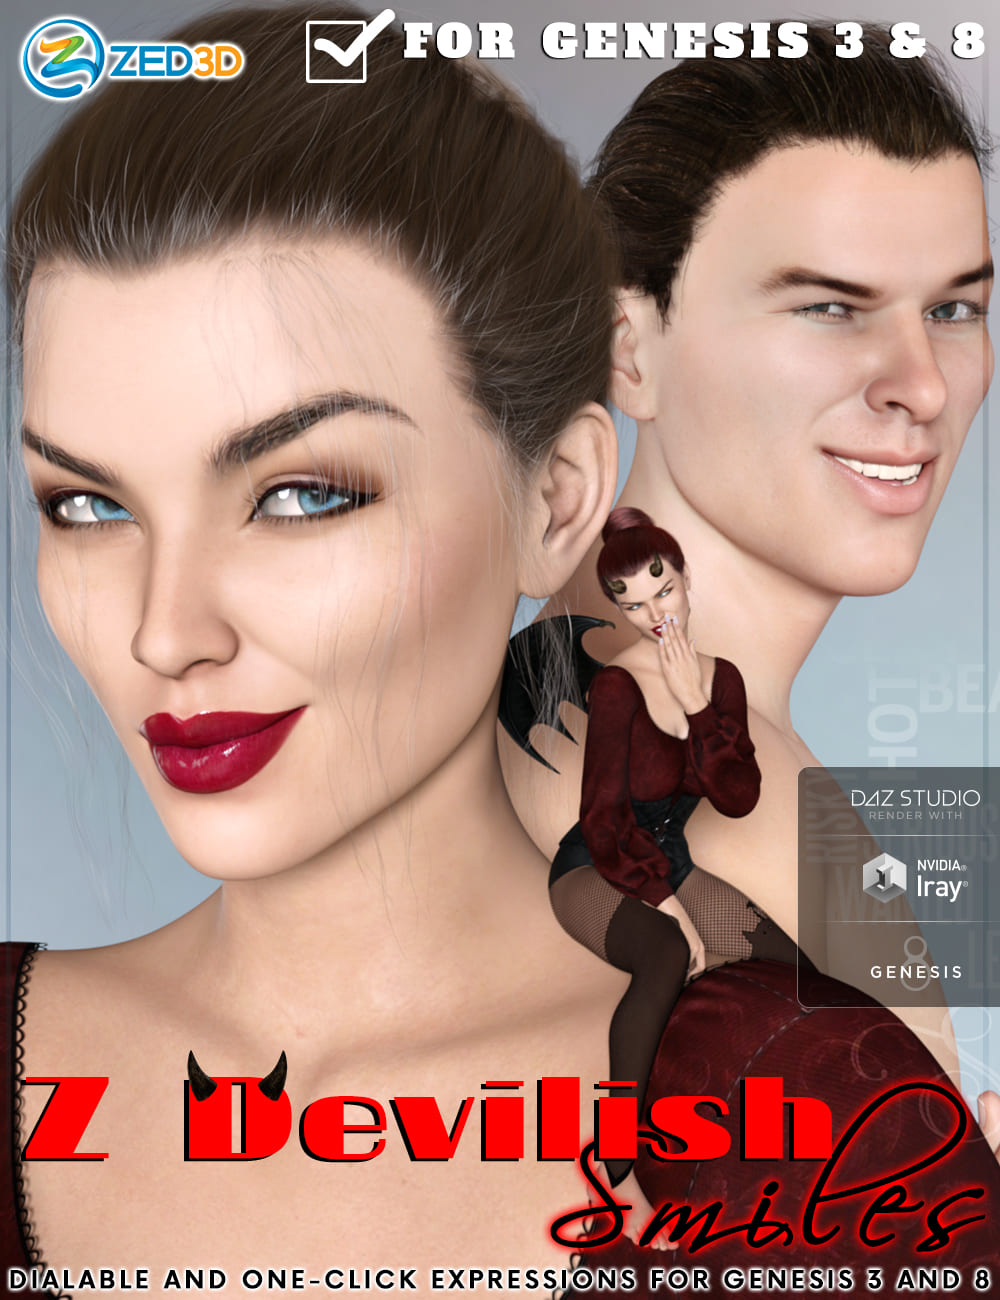 Z Devilish Smiles and Expressions for Genesis 3 and 8_DAZ3DDL